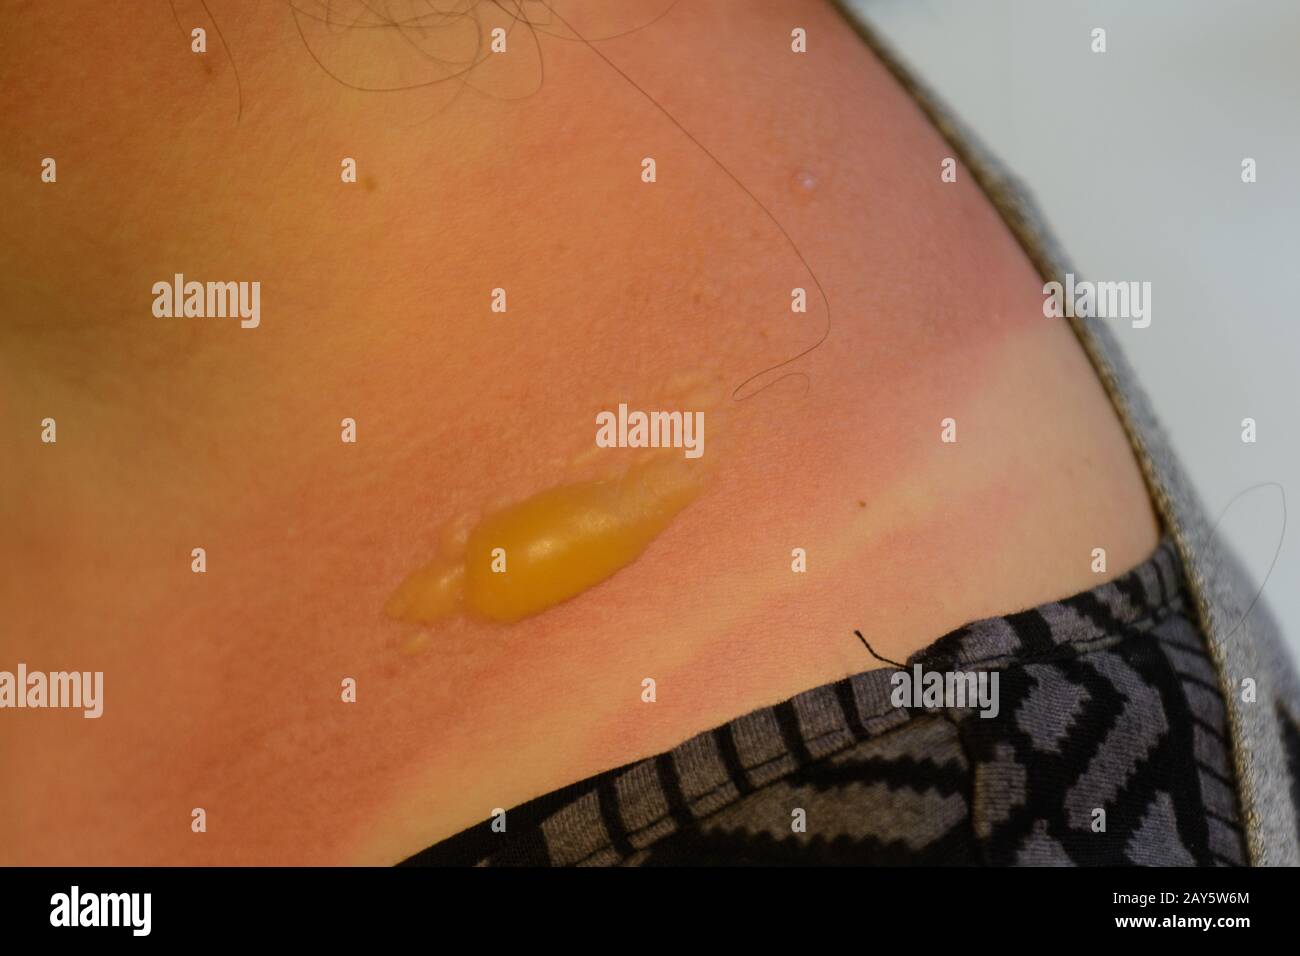 Sunburn with large blister on the shoulder Stock Photo